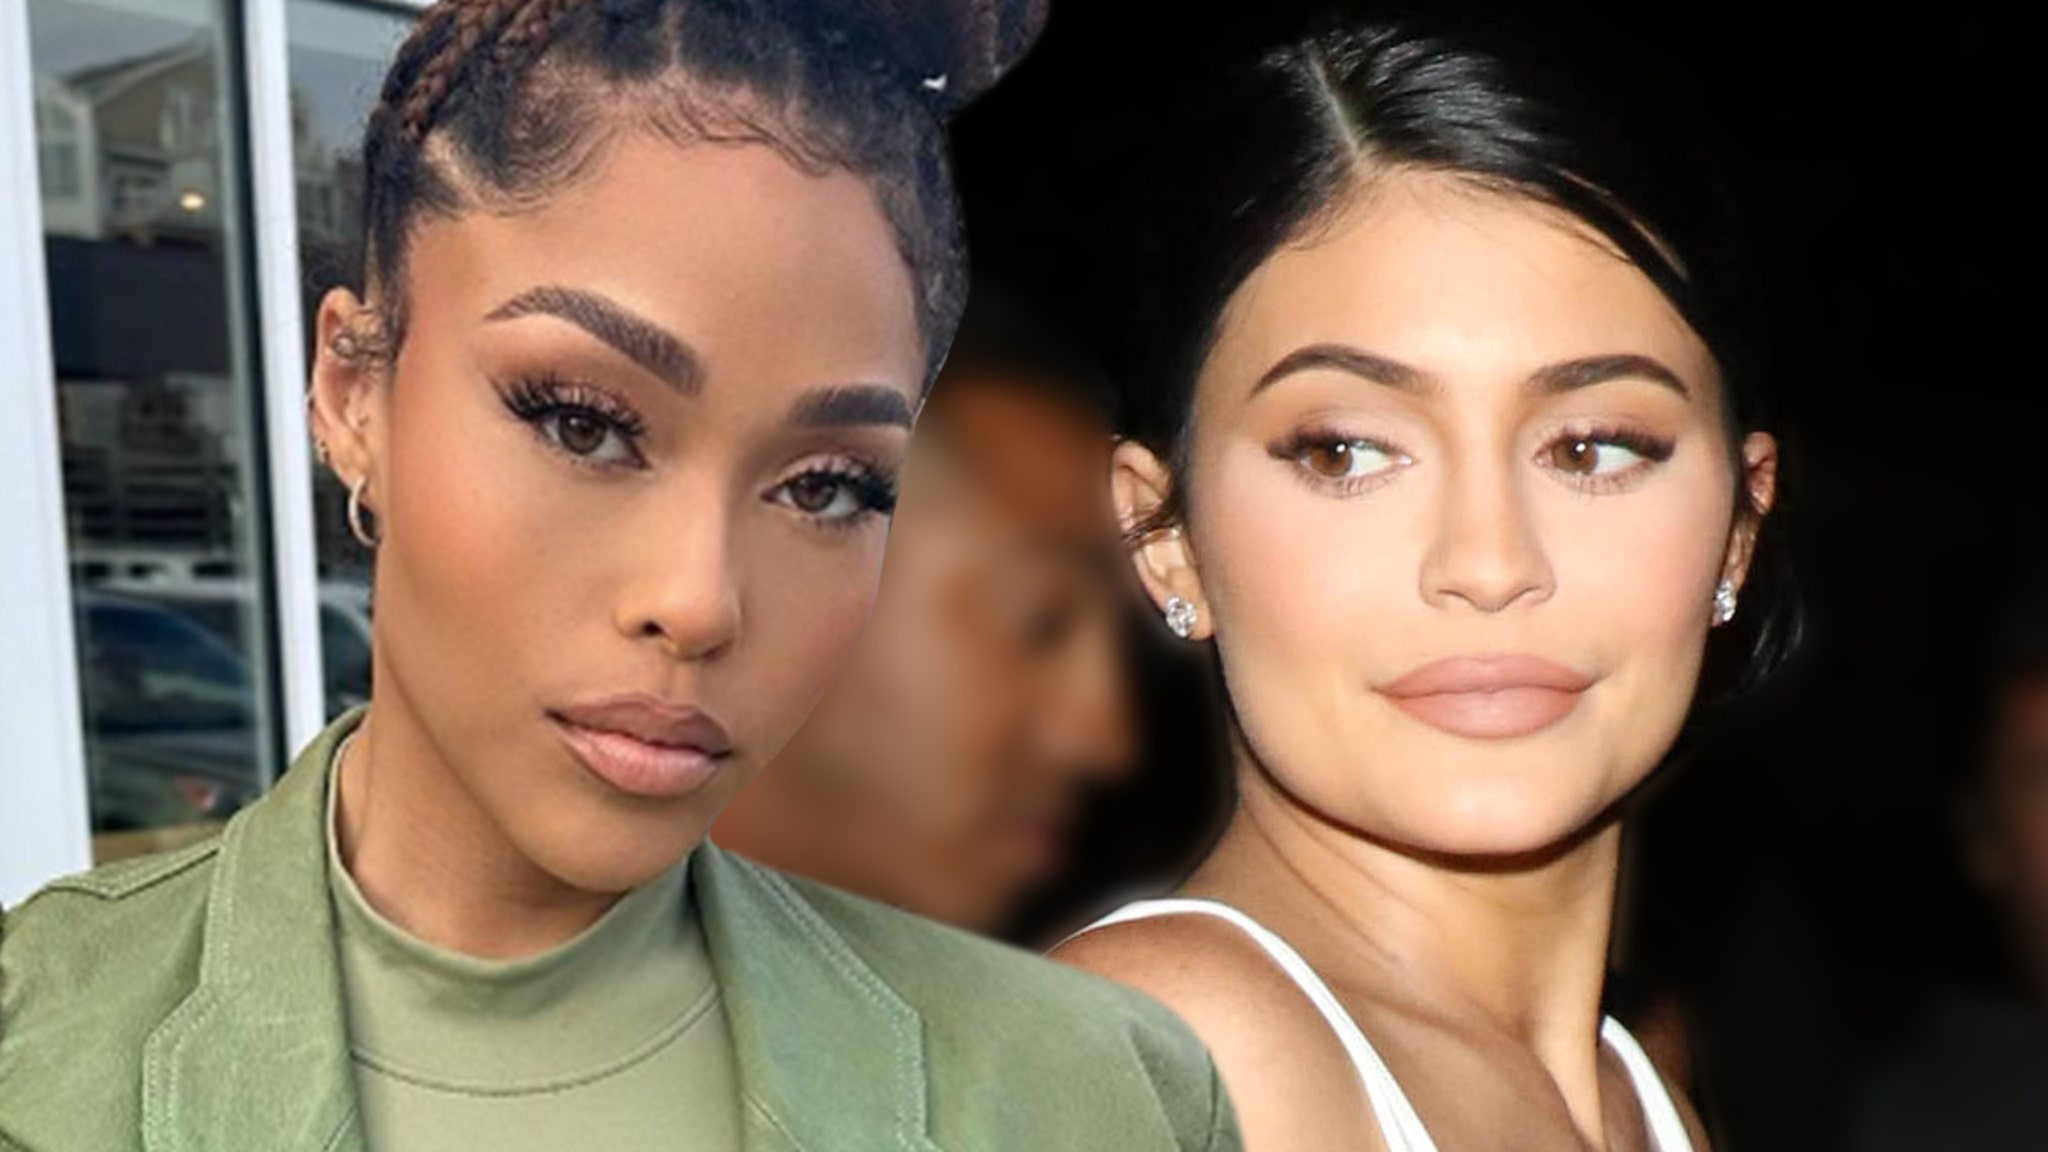 Jordyn Woods and Kylie Jenner Fans Urge The Two to Steer Clear Amid Rekindling